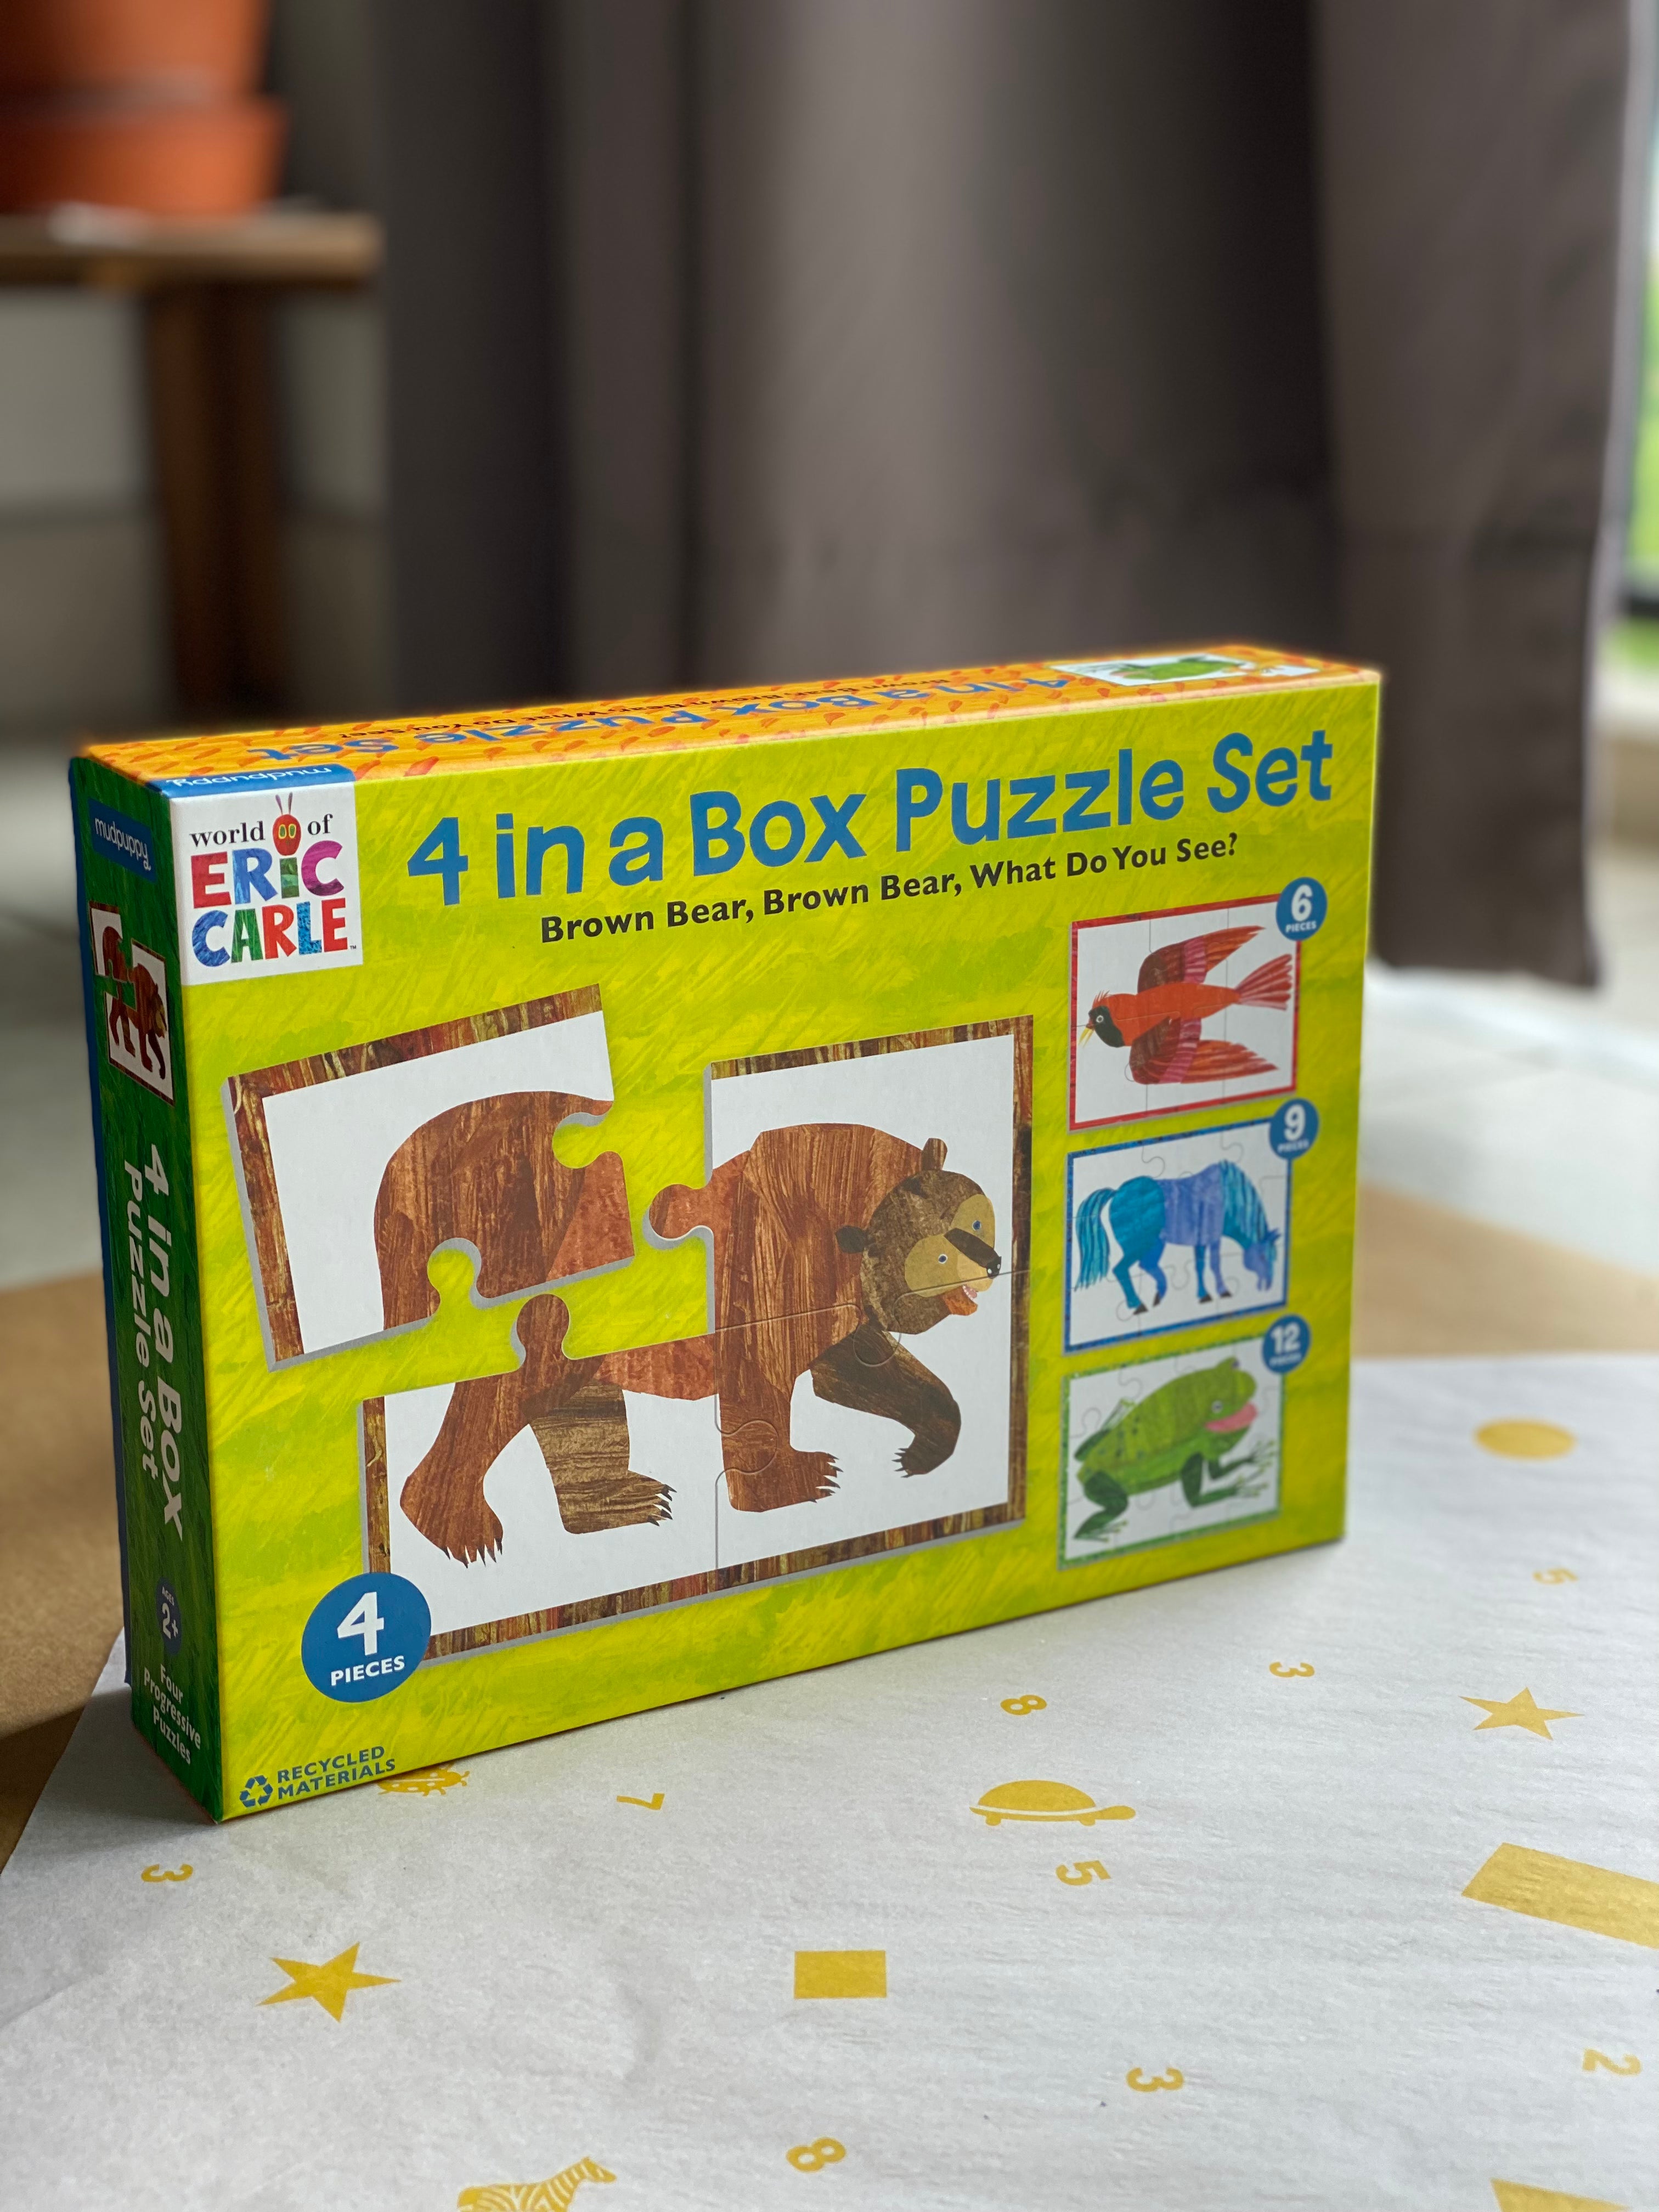 Progressive　Brown　The　–　Clap　Puzzle　world　Eric　of　Clap　Carle:　Bear　4-In-a-Box　Hands